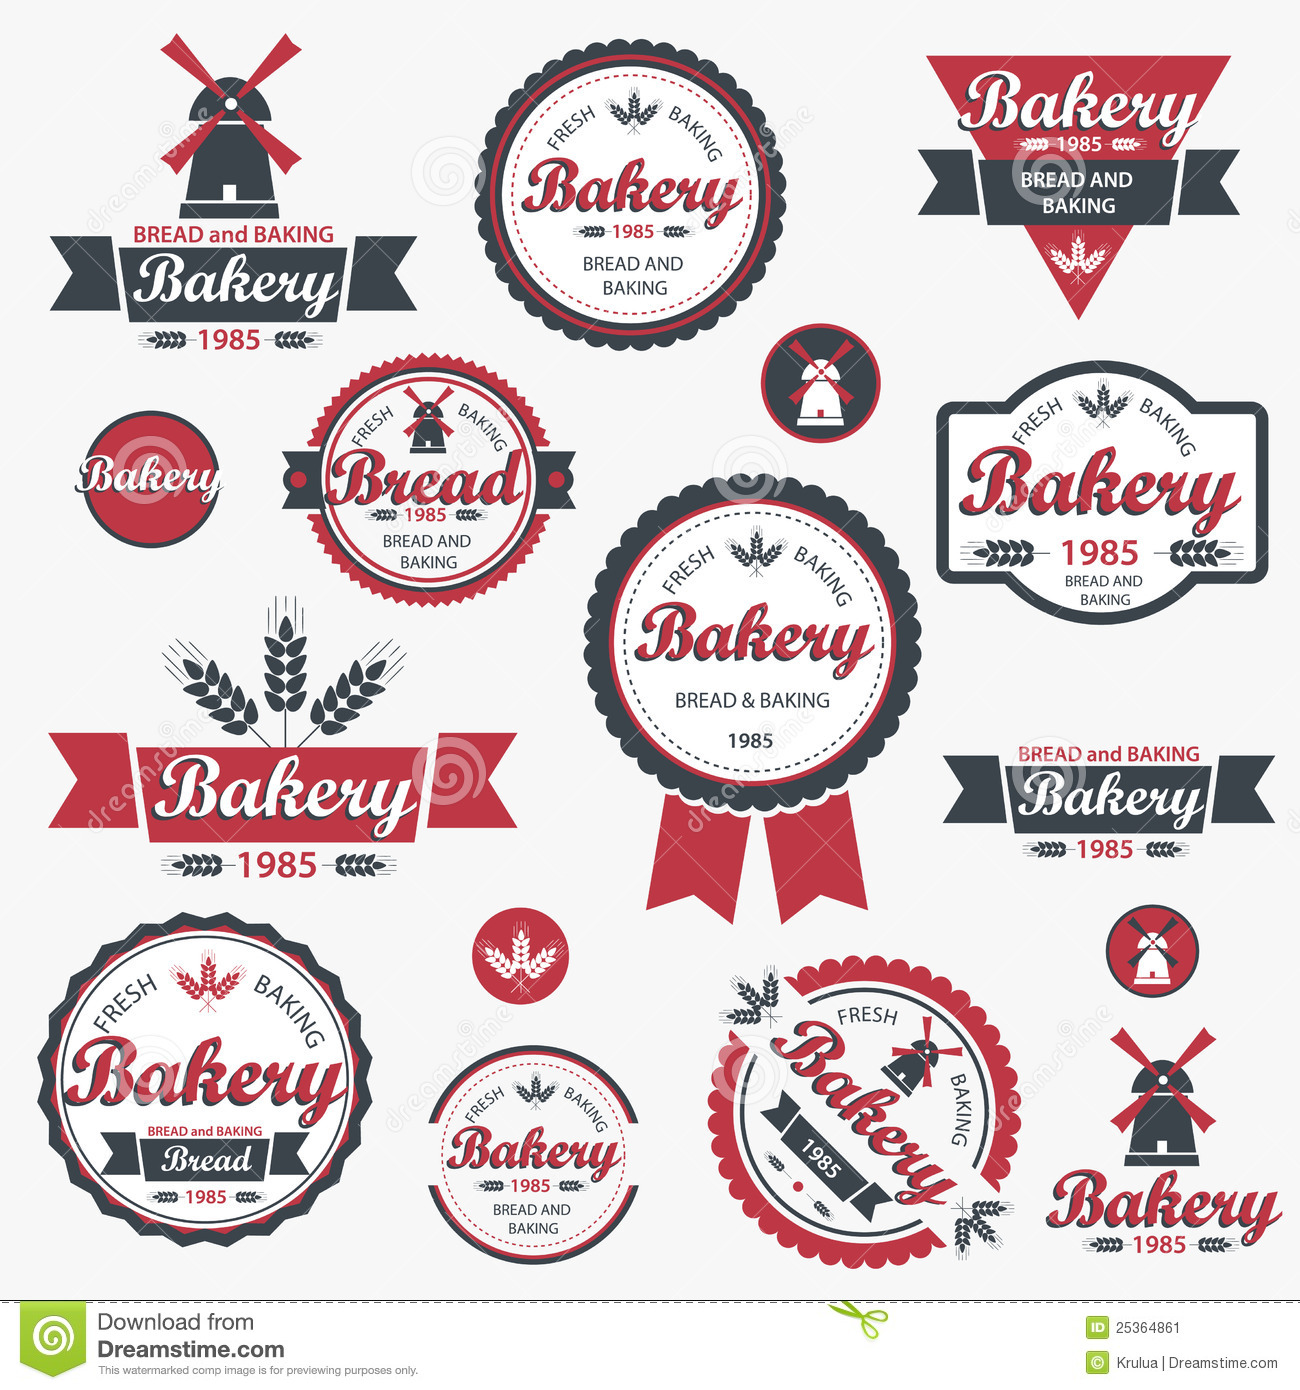 Vintage Retro Bakery Badges And Labels  Stock Image   Image  25364861